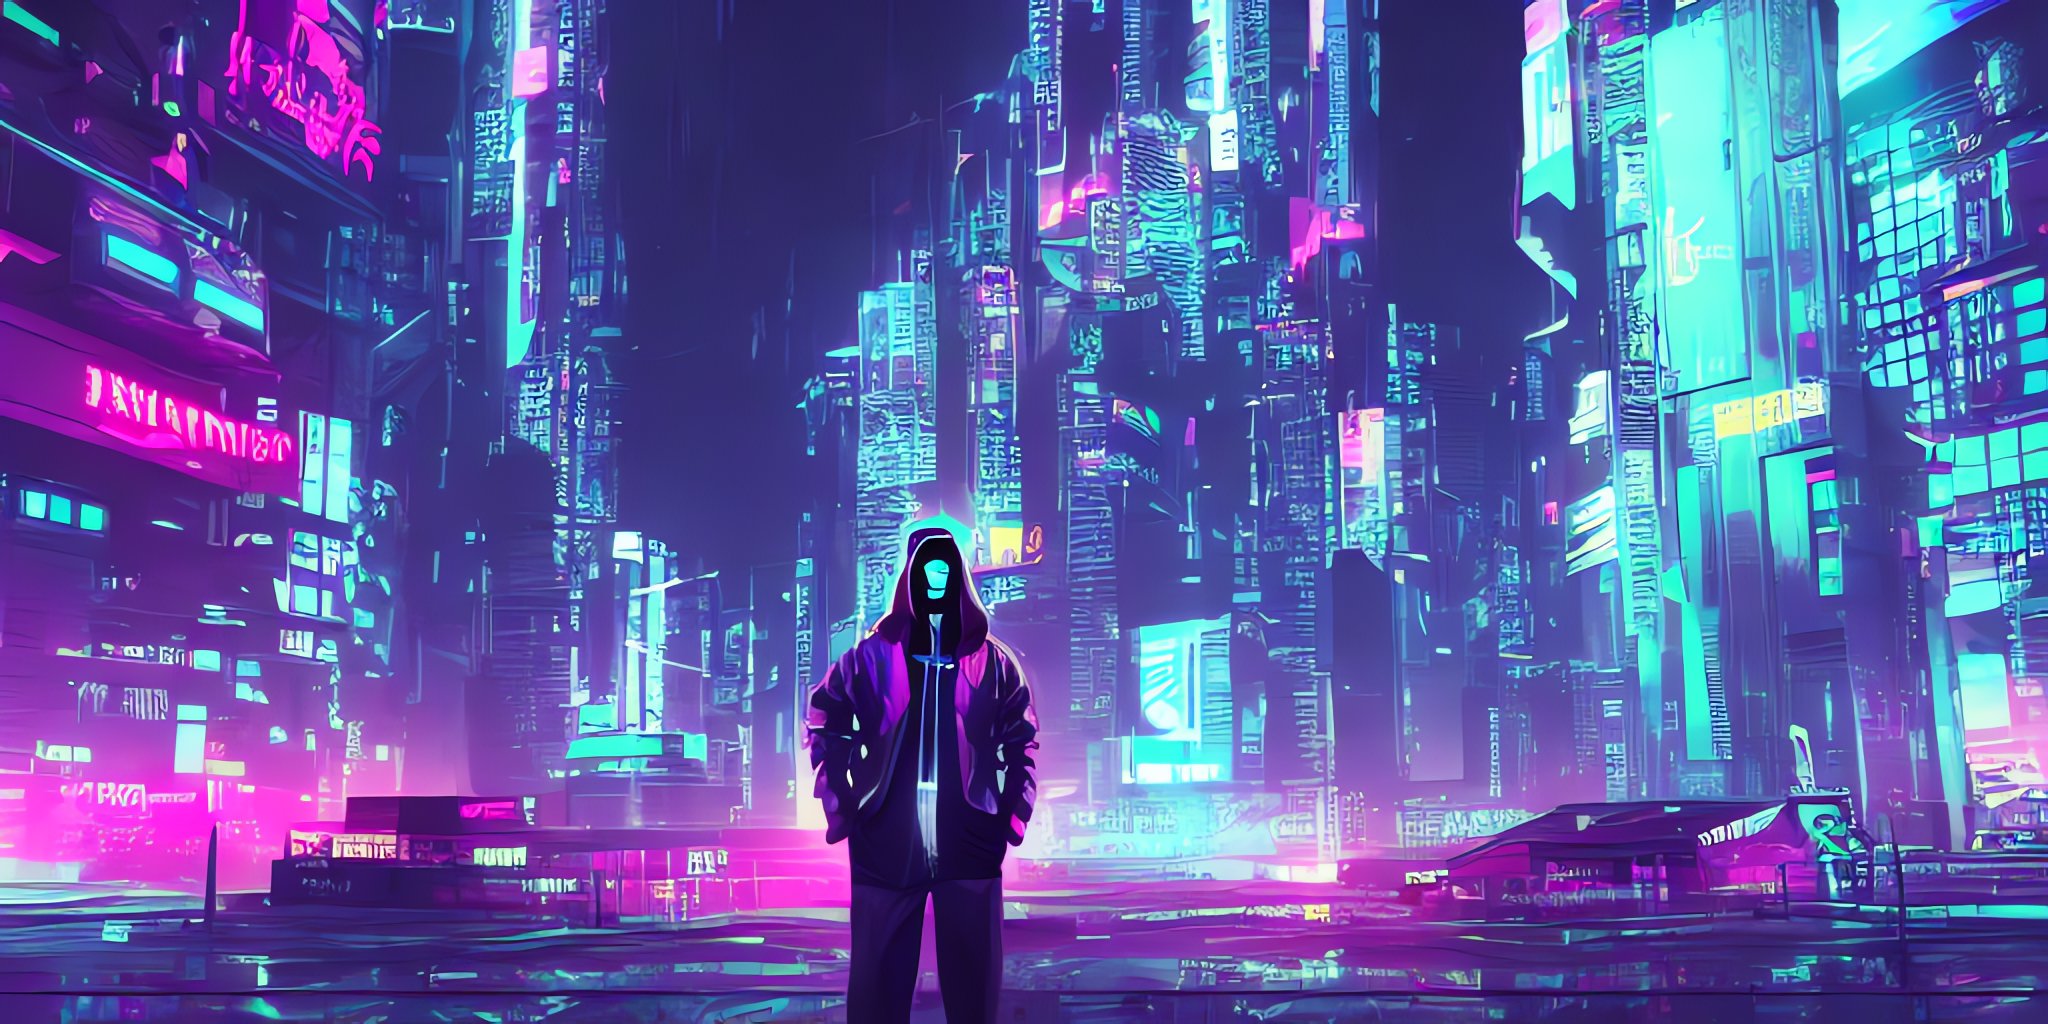 An image of Cyberpunk cyber hacker in the neon city at midnight